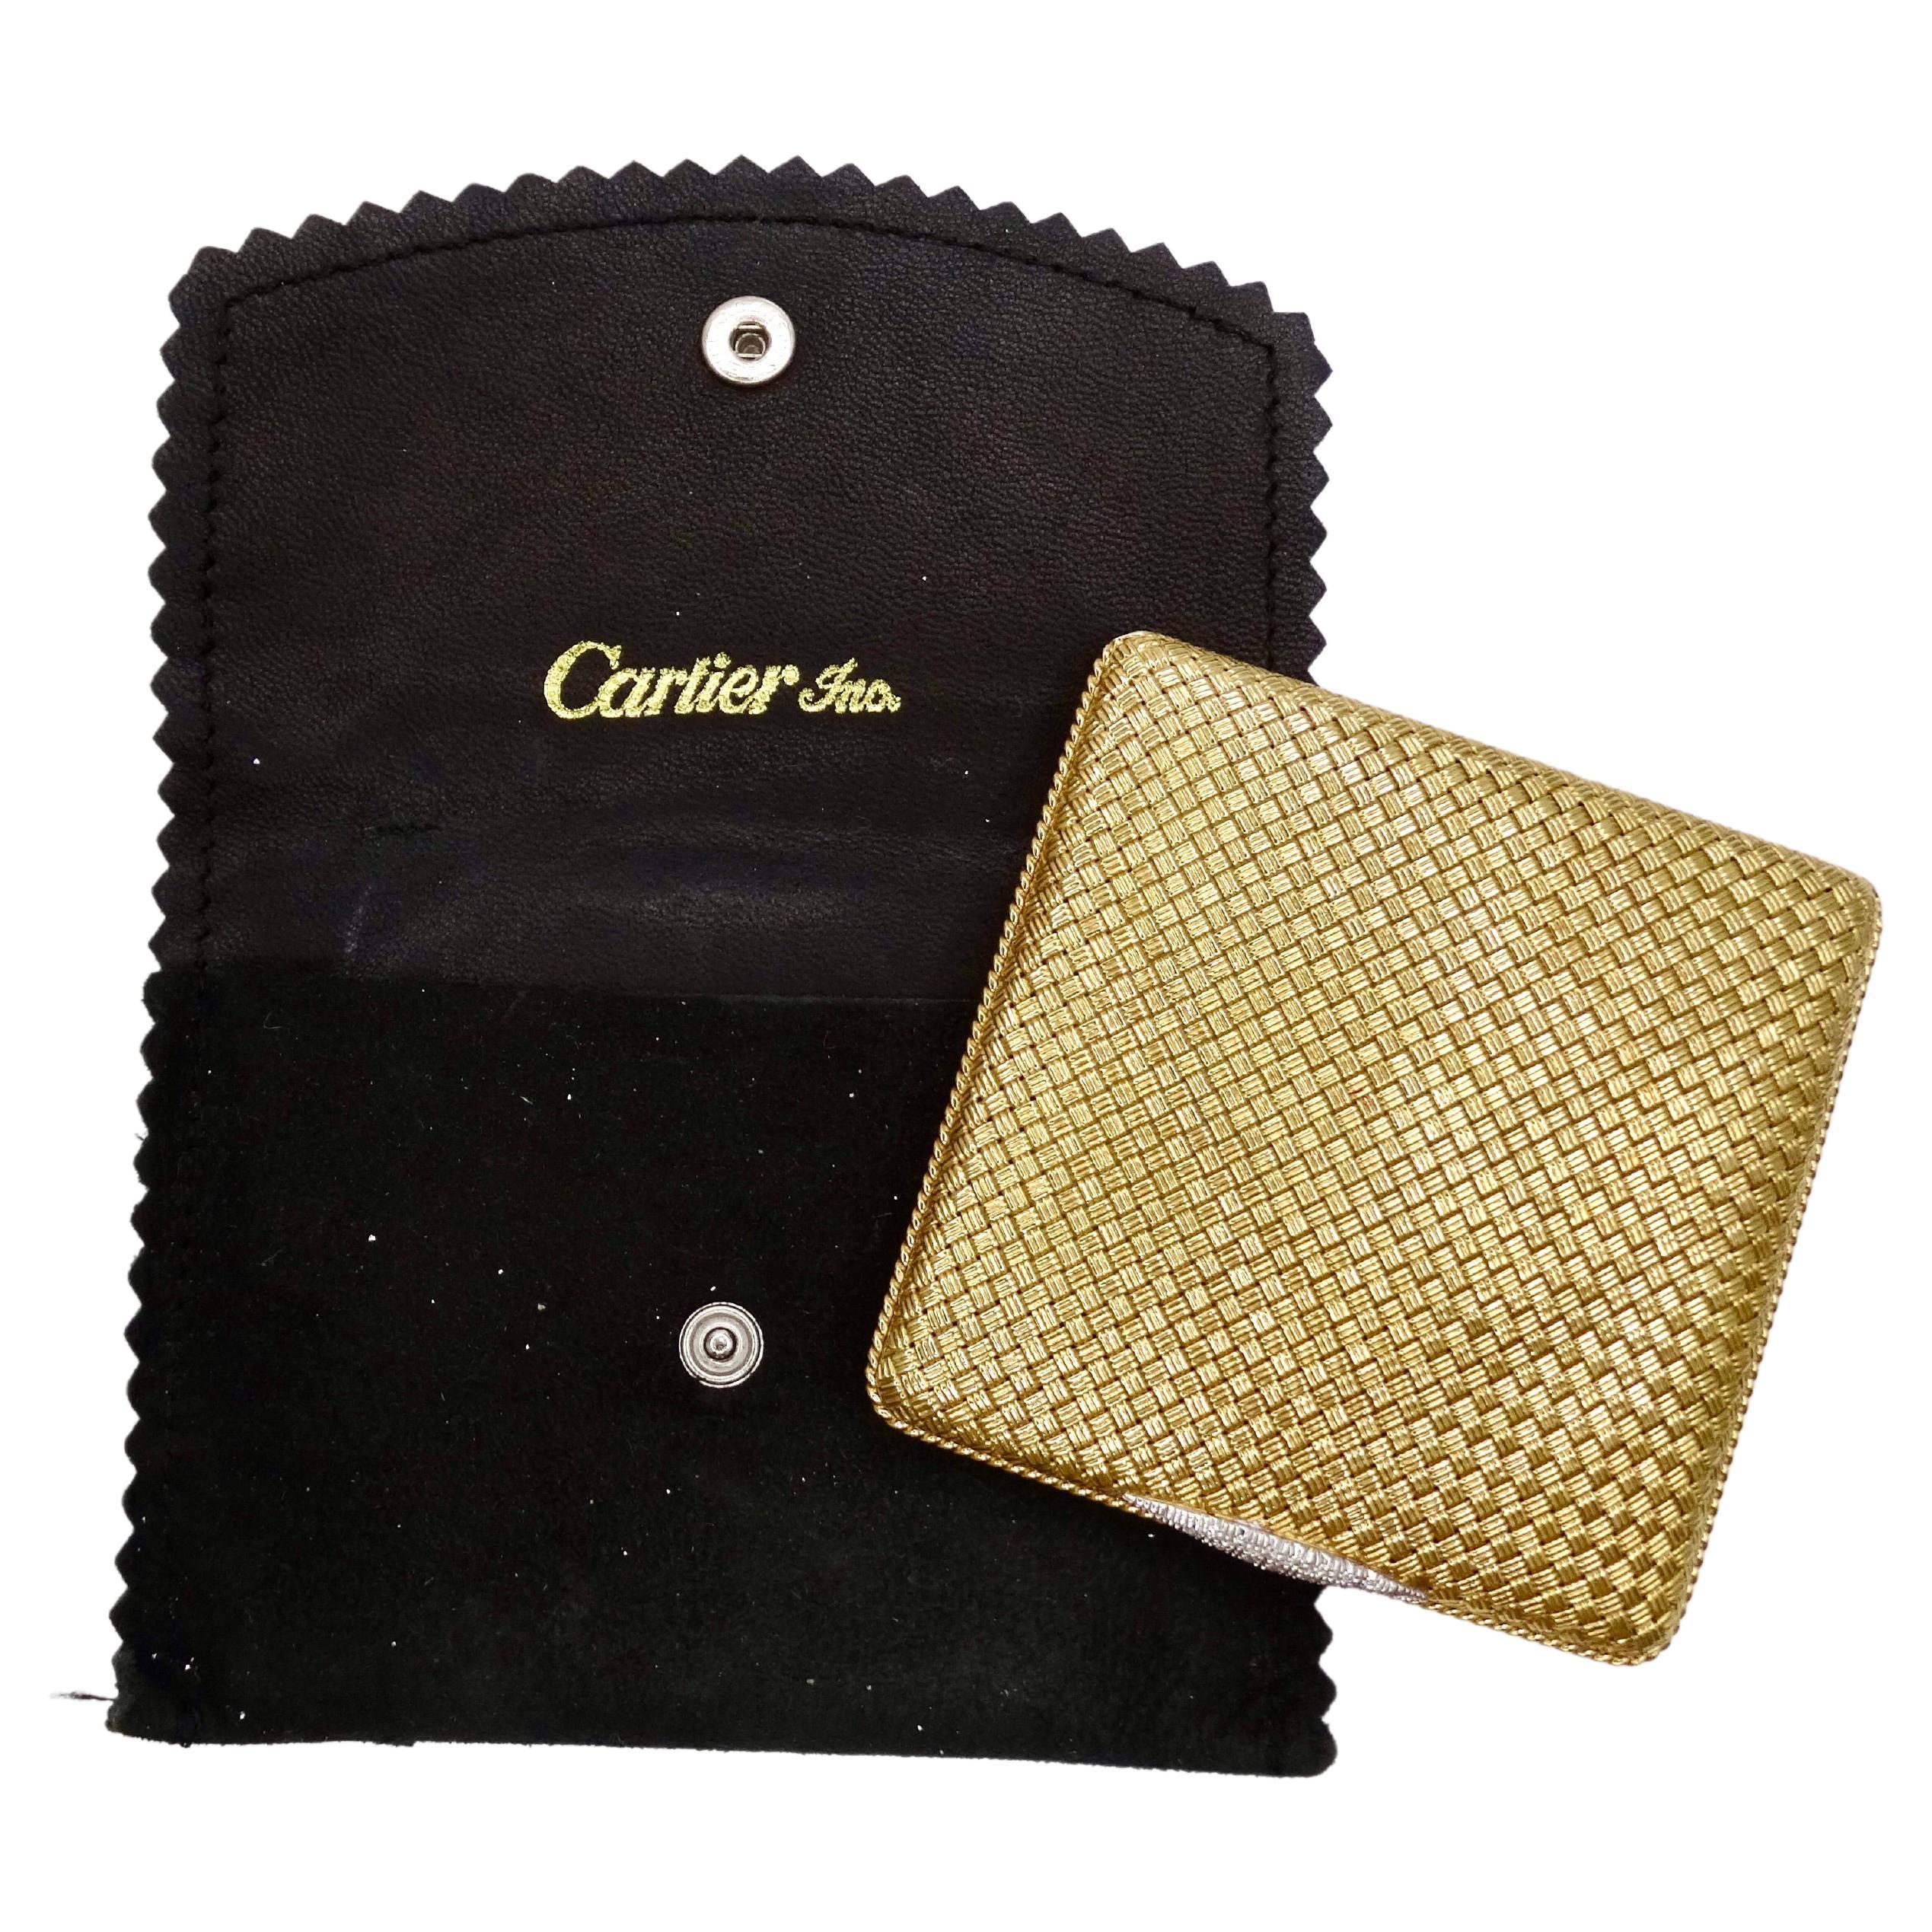 Vintage 18K yellow gold Cartier compact powder box with a woven texture and diamond encrusted thumb-piece. Circa 1950's. The compact is stamped with the maker's mark of 750. Weight: 153.89g grams Measurements: Width: 2.75 in (60 mm) Depth: 0.4 in